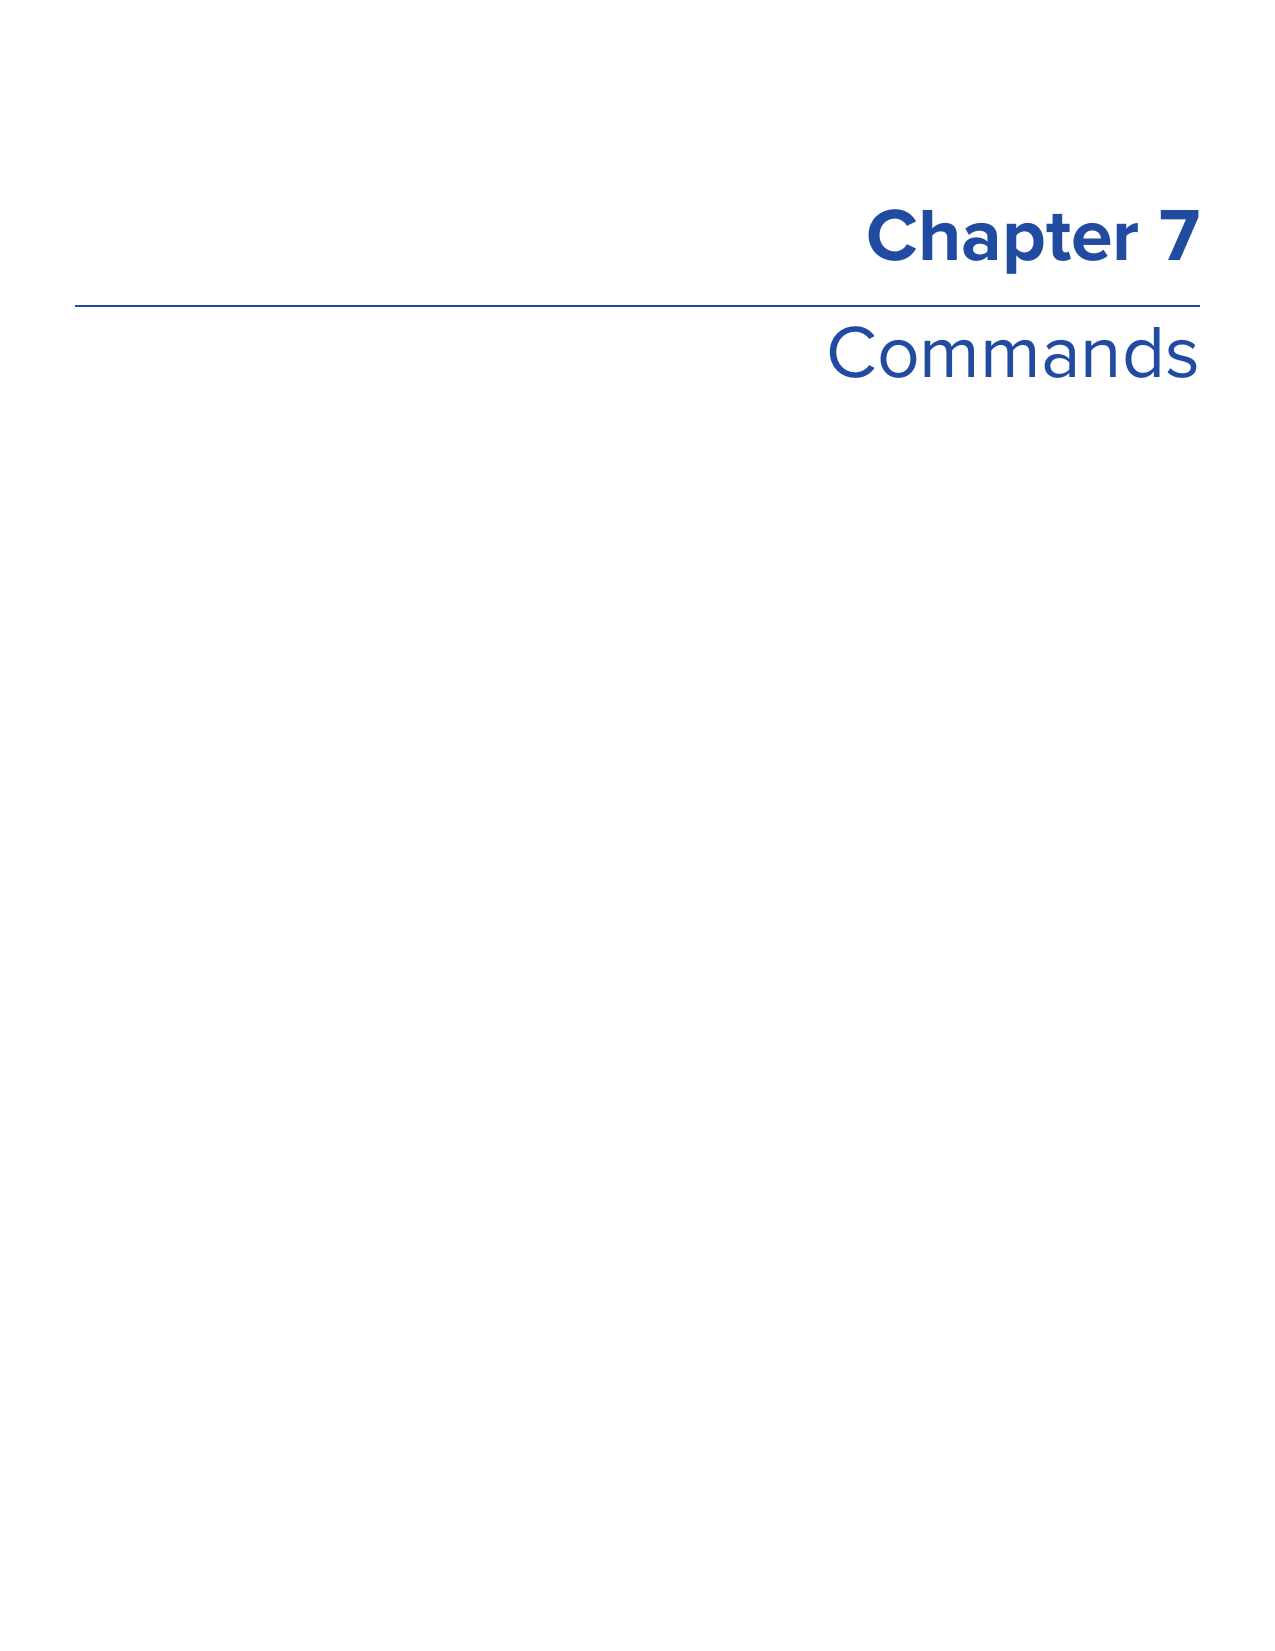  Chapter 7Commands